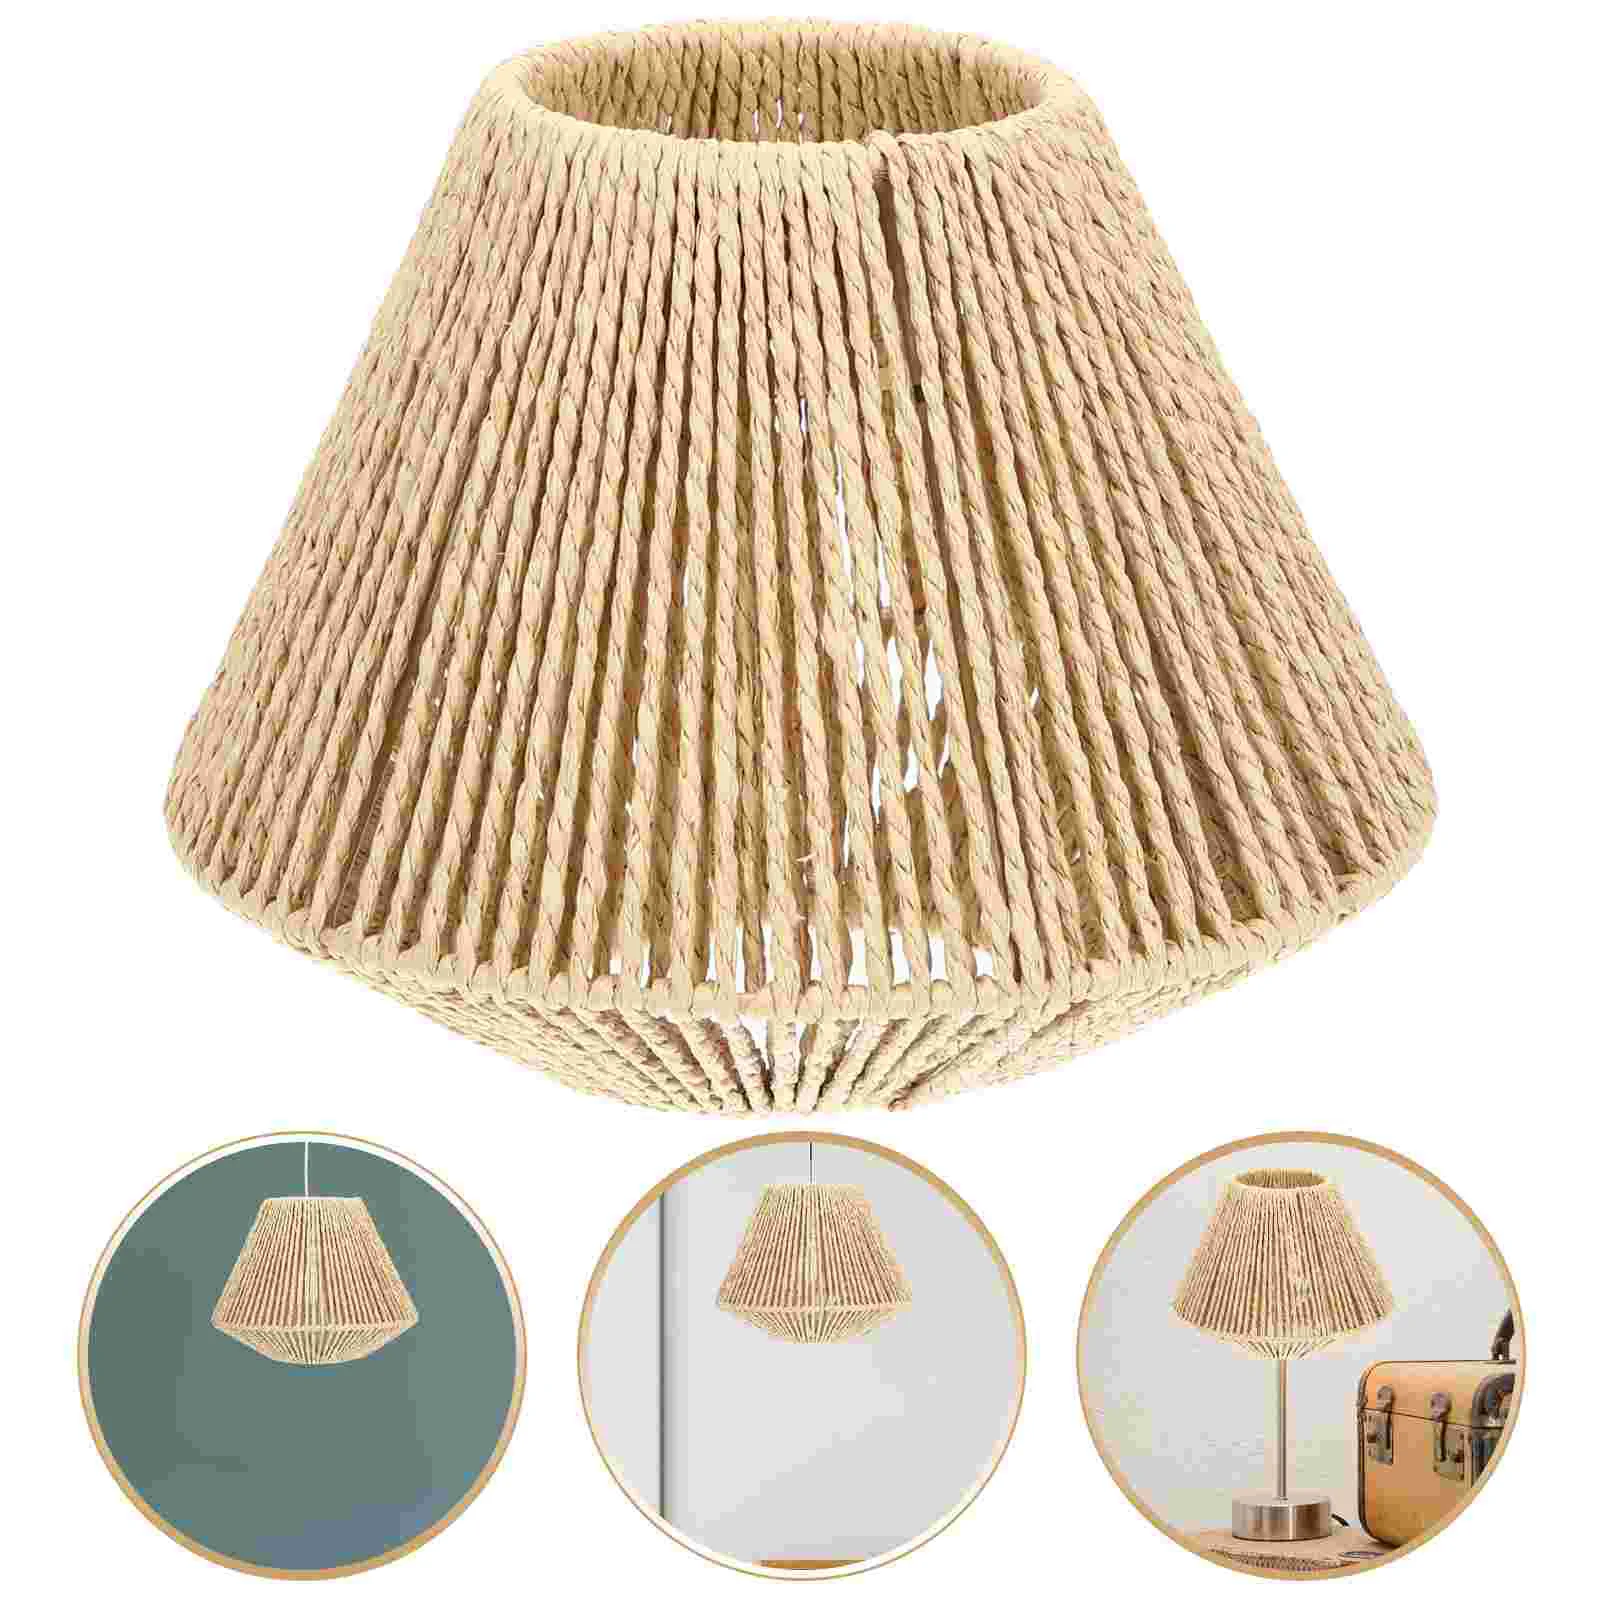 Straw Woven Lampshade Hanging Lamp Rustic Vintage Decor for Home Hotel Restaurant Braided Vintage Lampshade